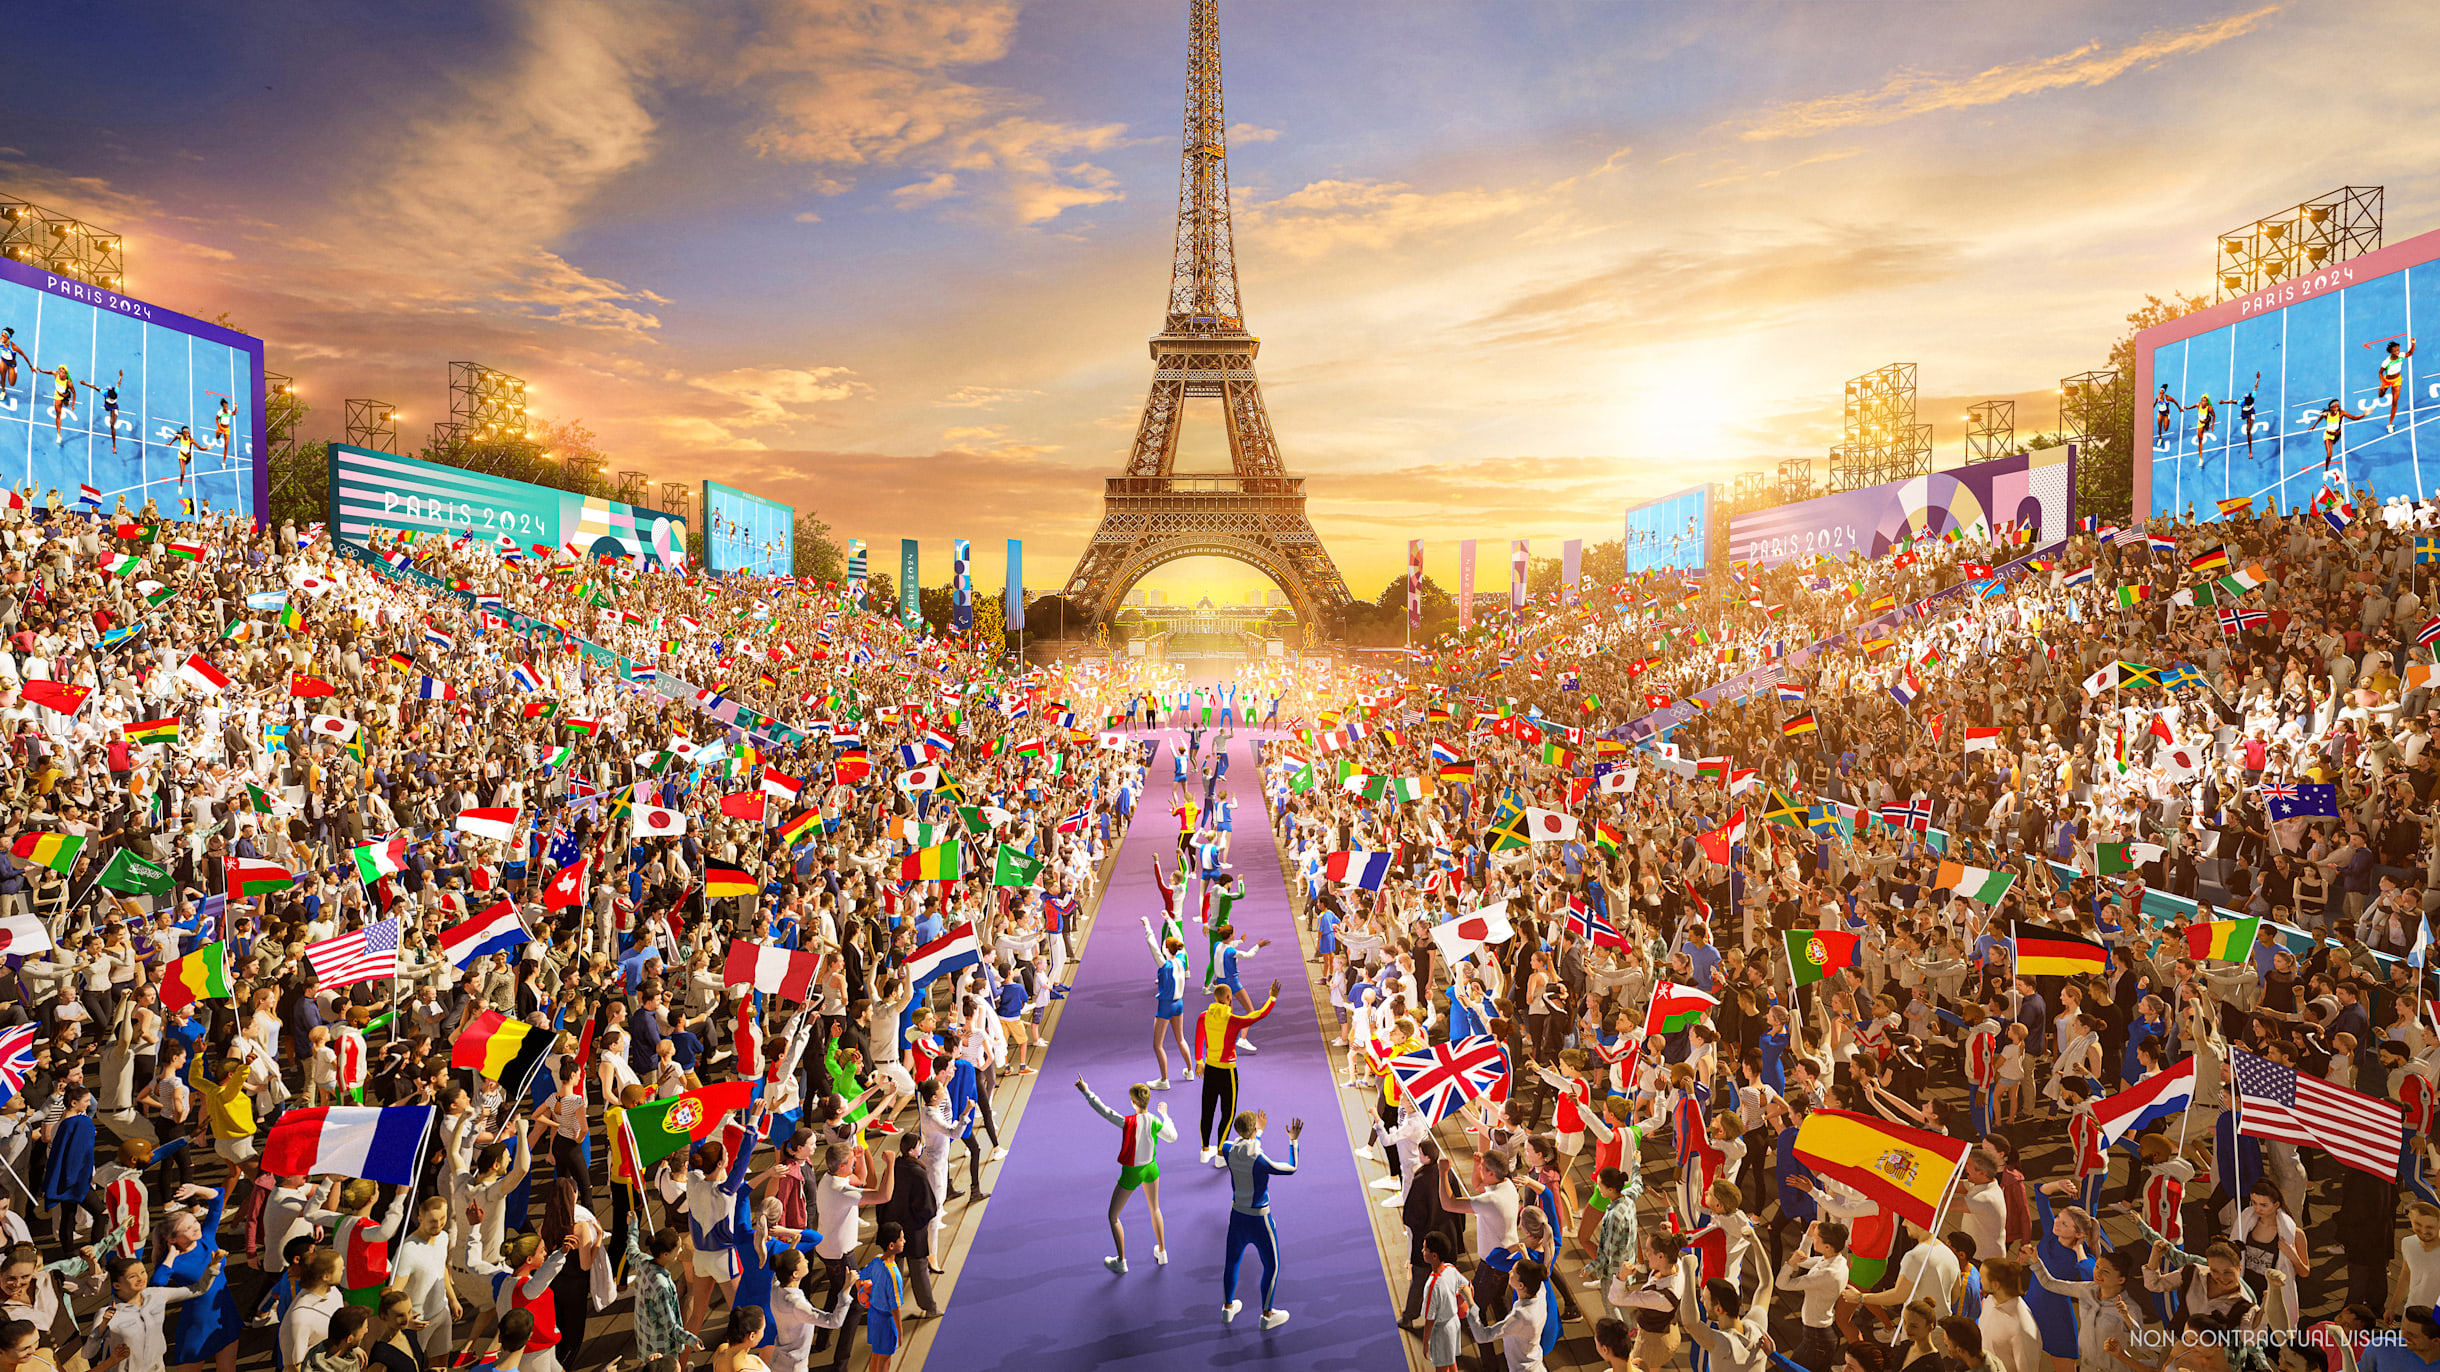 Everything you need to know about Frances celebration sites for the Olympic and Paralympic Games Paris 2024